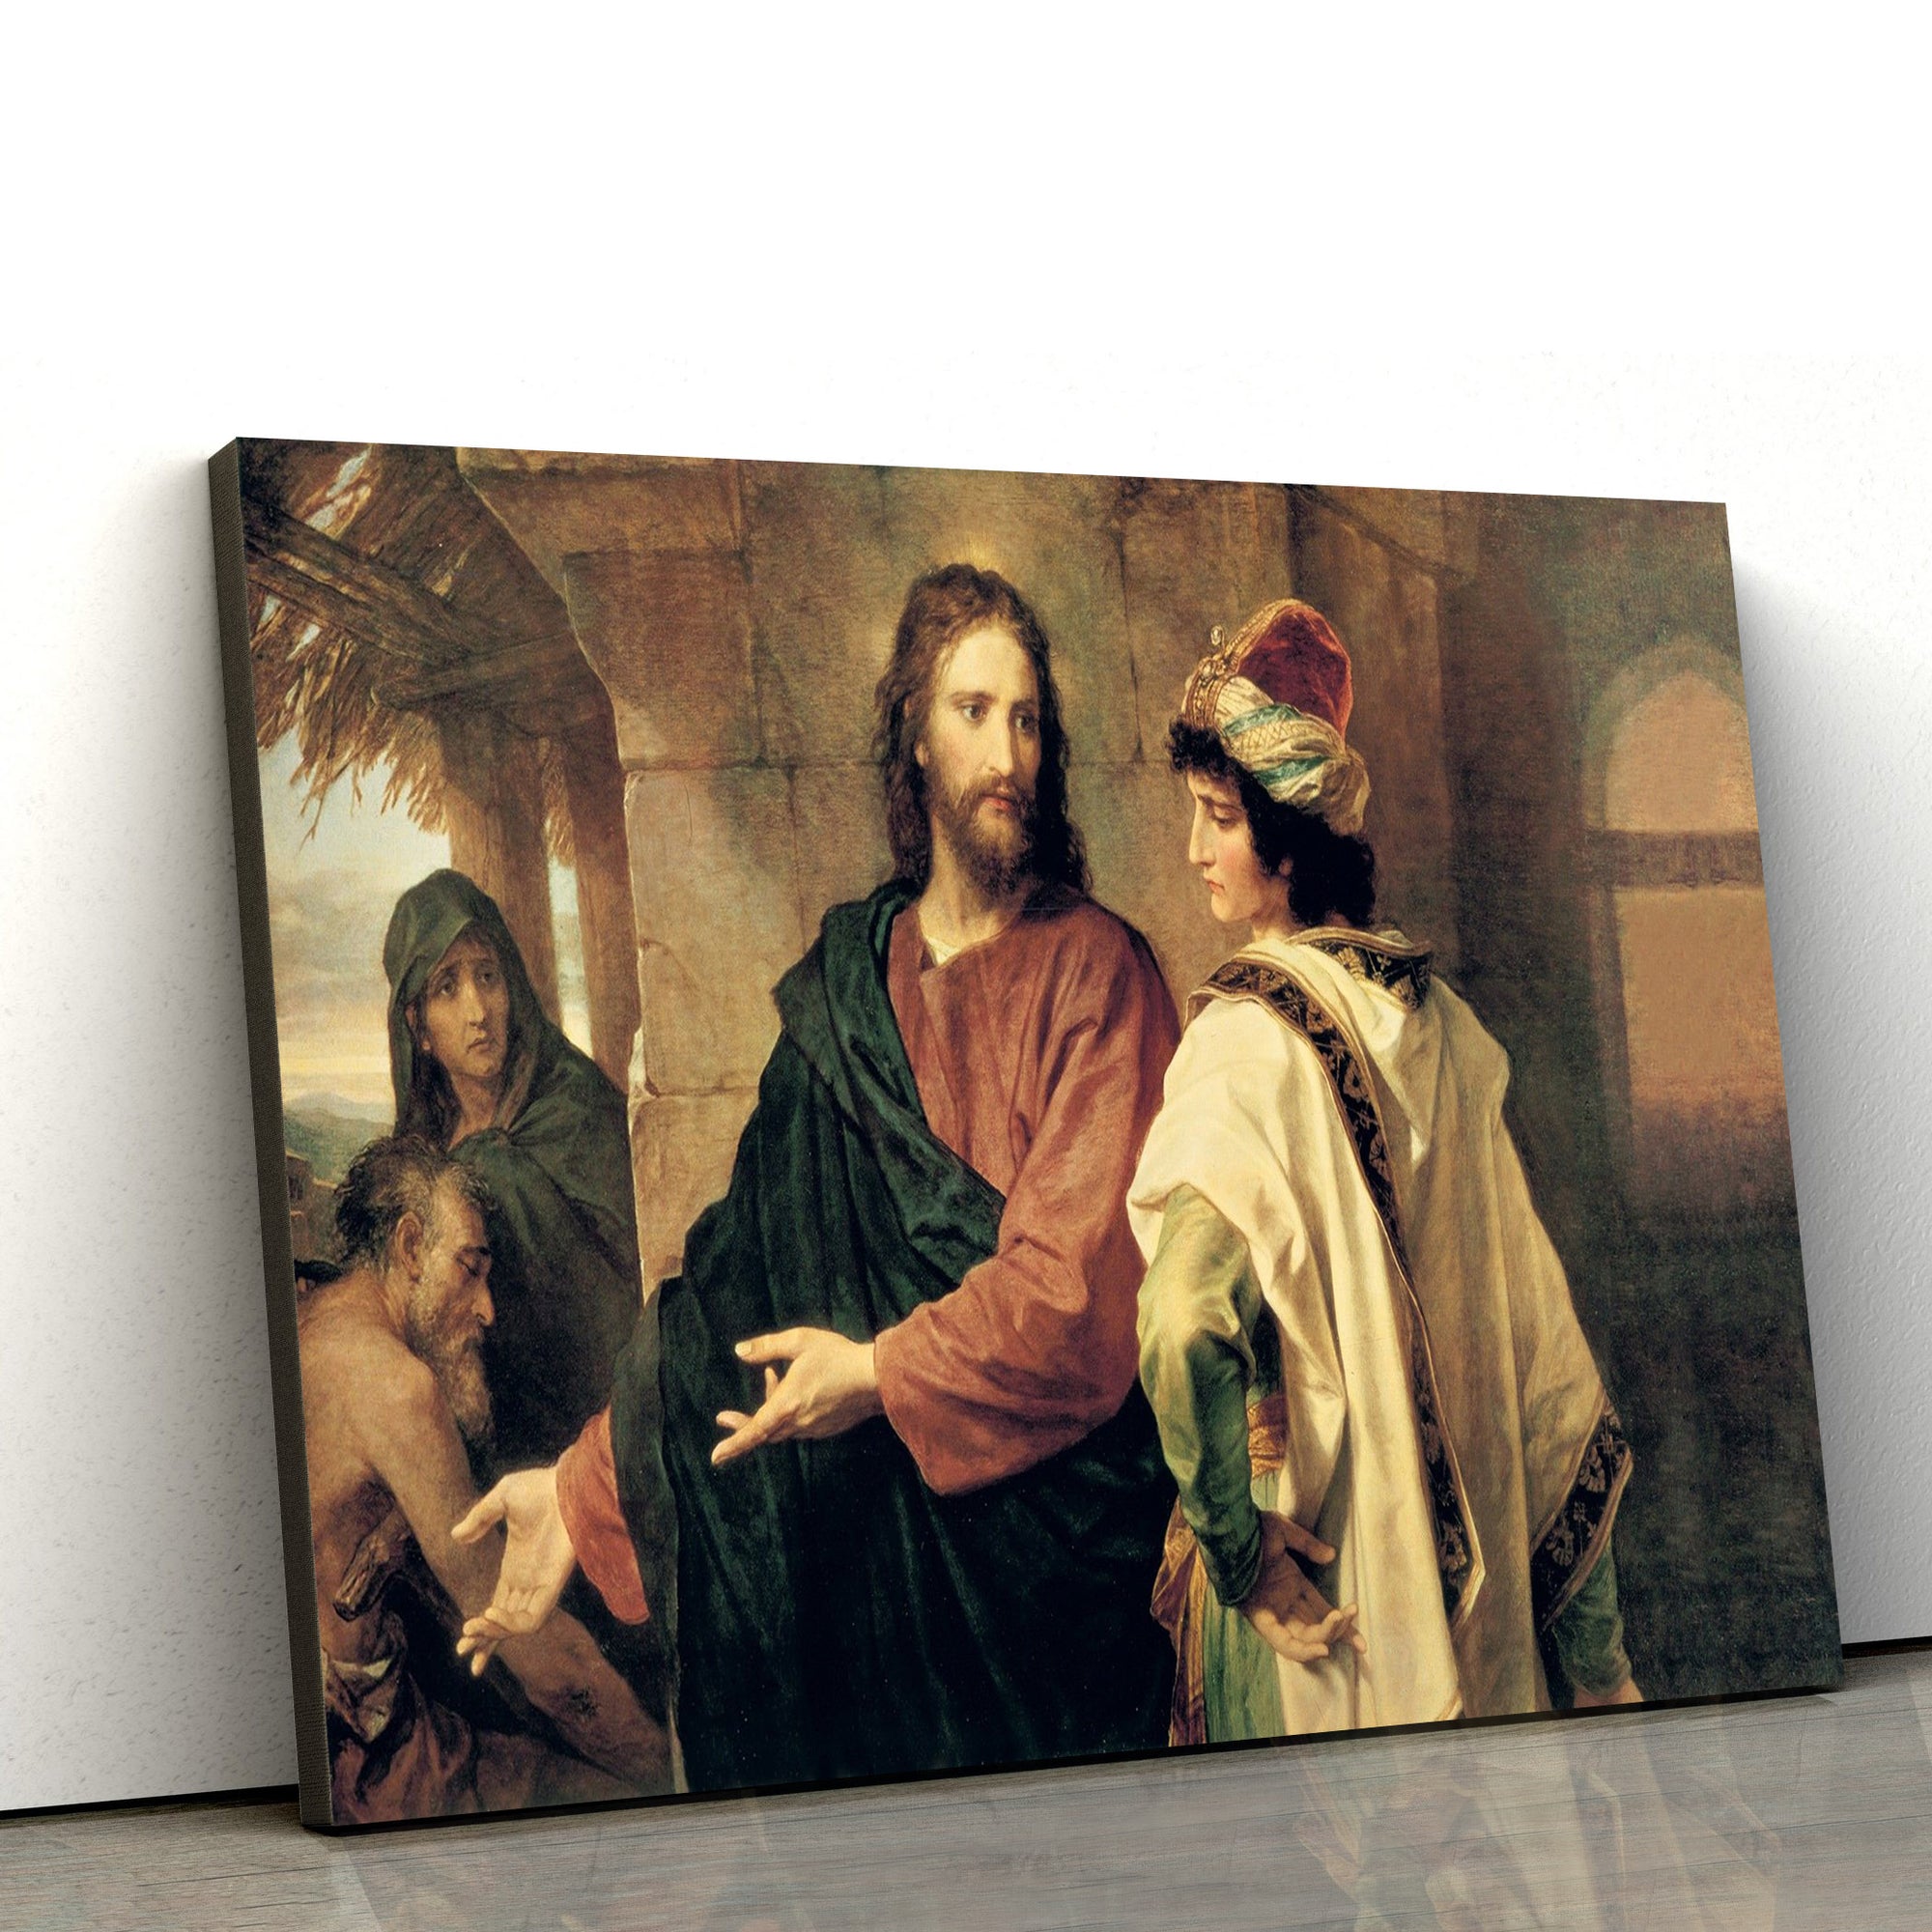 Christ And The Rich Young Ruler Canvas Wall Art - Christian Canvas Pictures - Religious Canvas Wall Art